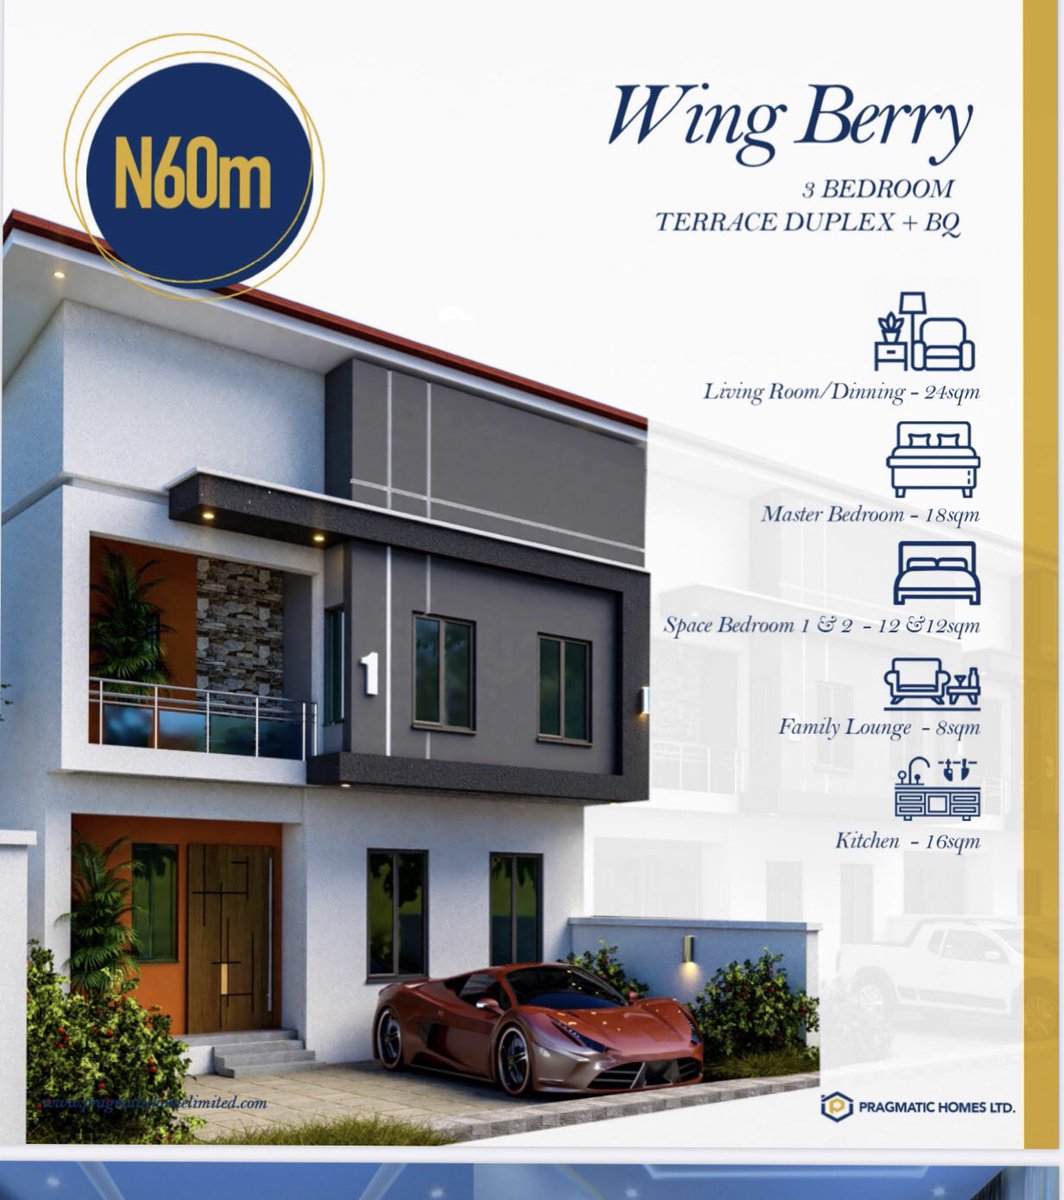 Hi there, join me as I take you through LUXURY in a few minutes.These products are specially designed to give you the utmost comfort at affordable prices.DM open for further discussions, let me lead you to the promised land, Berry Court Omole Phase 2 #RealEstate #THREAD